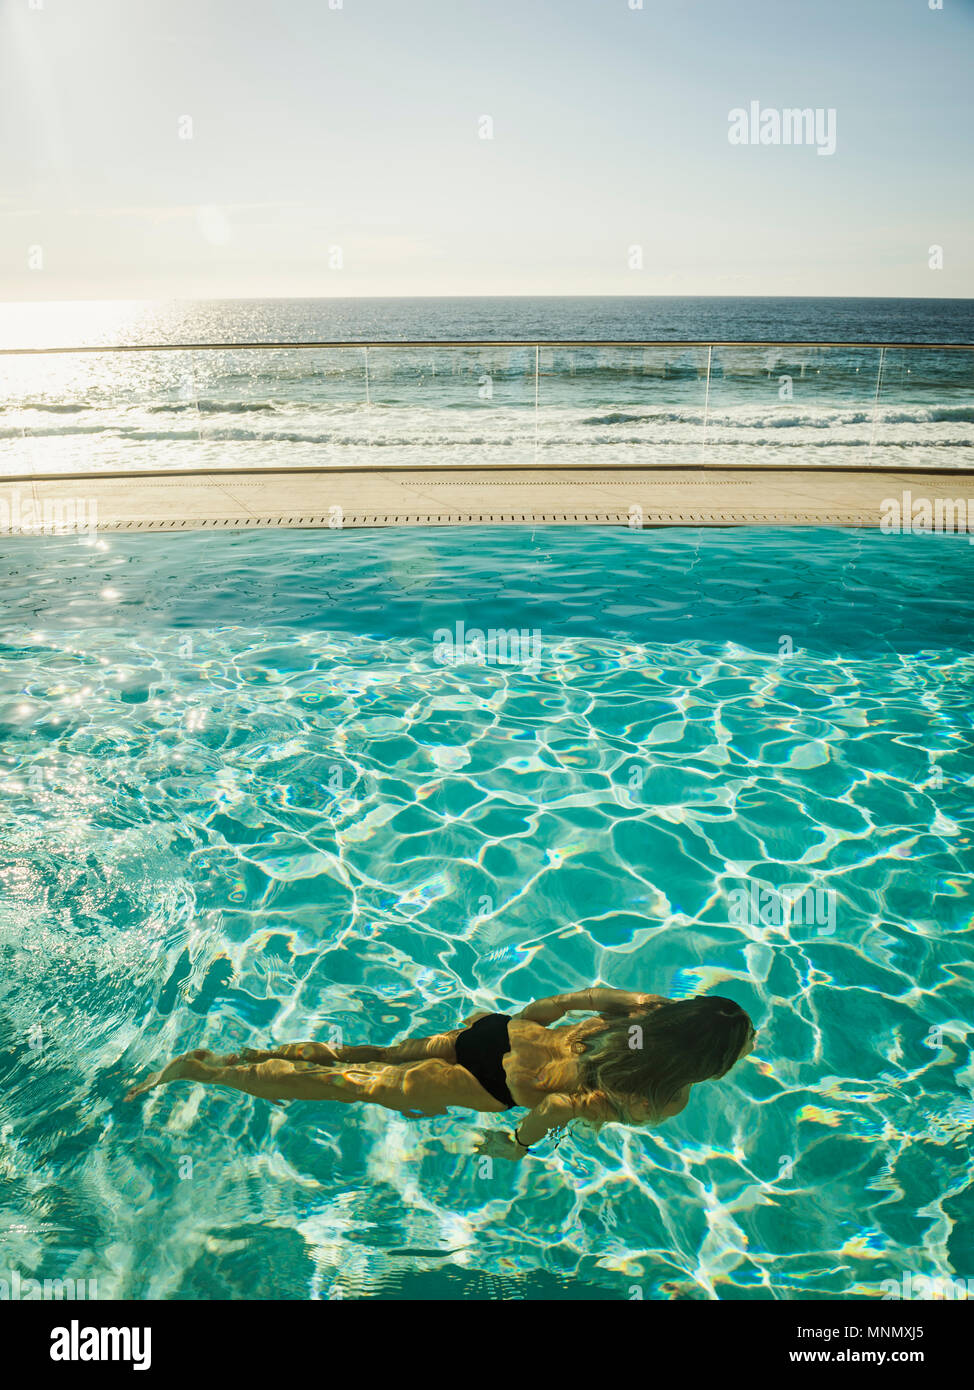 Woman swimming in pool by ocean Stock Photo